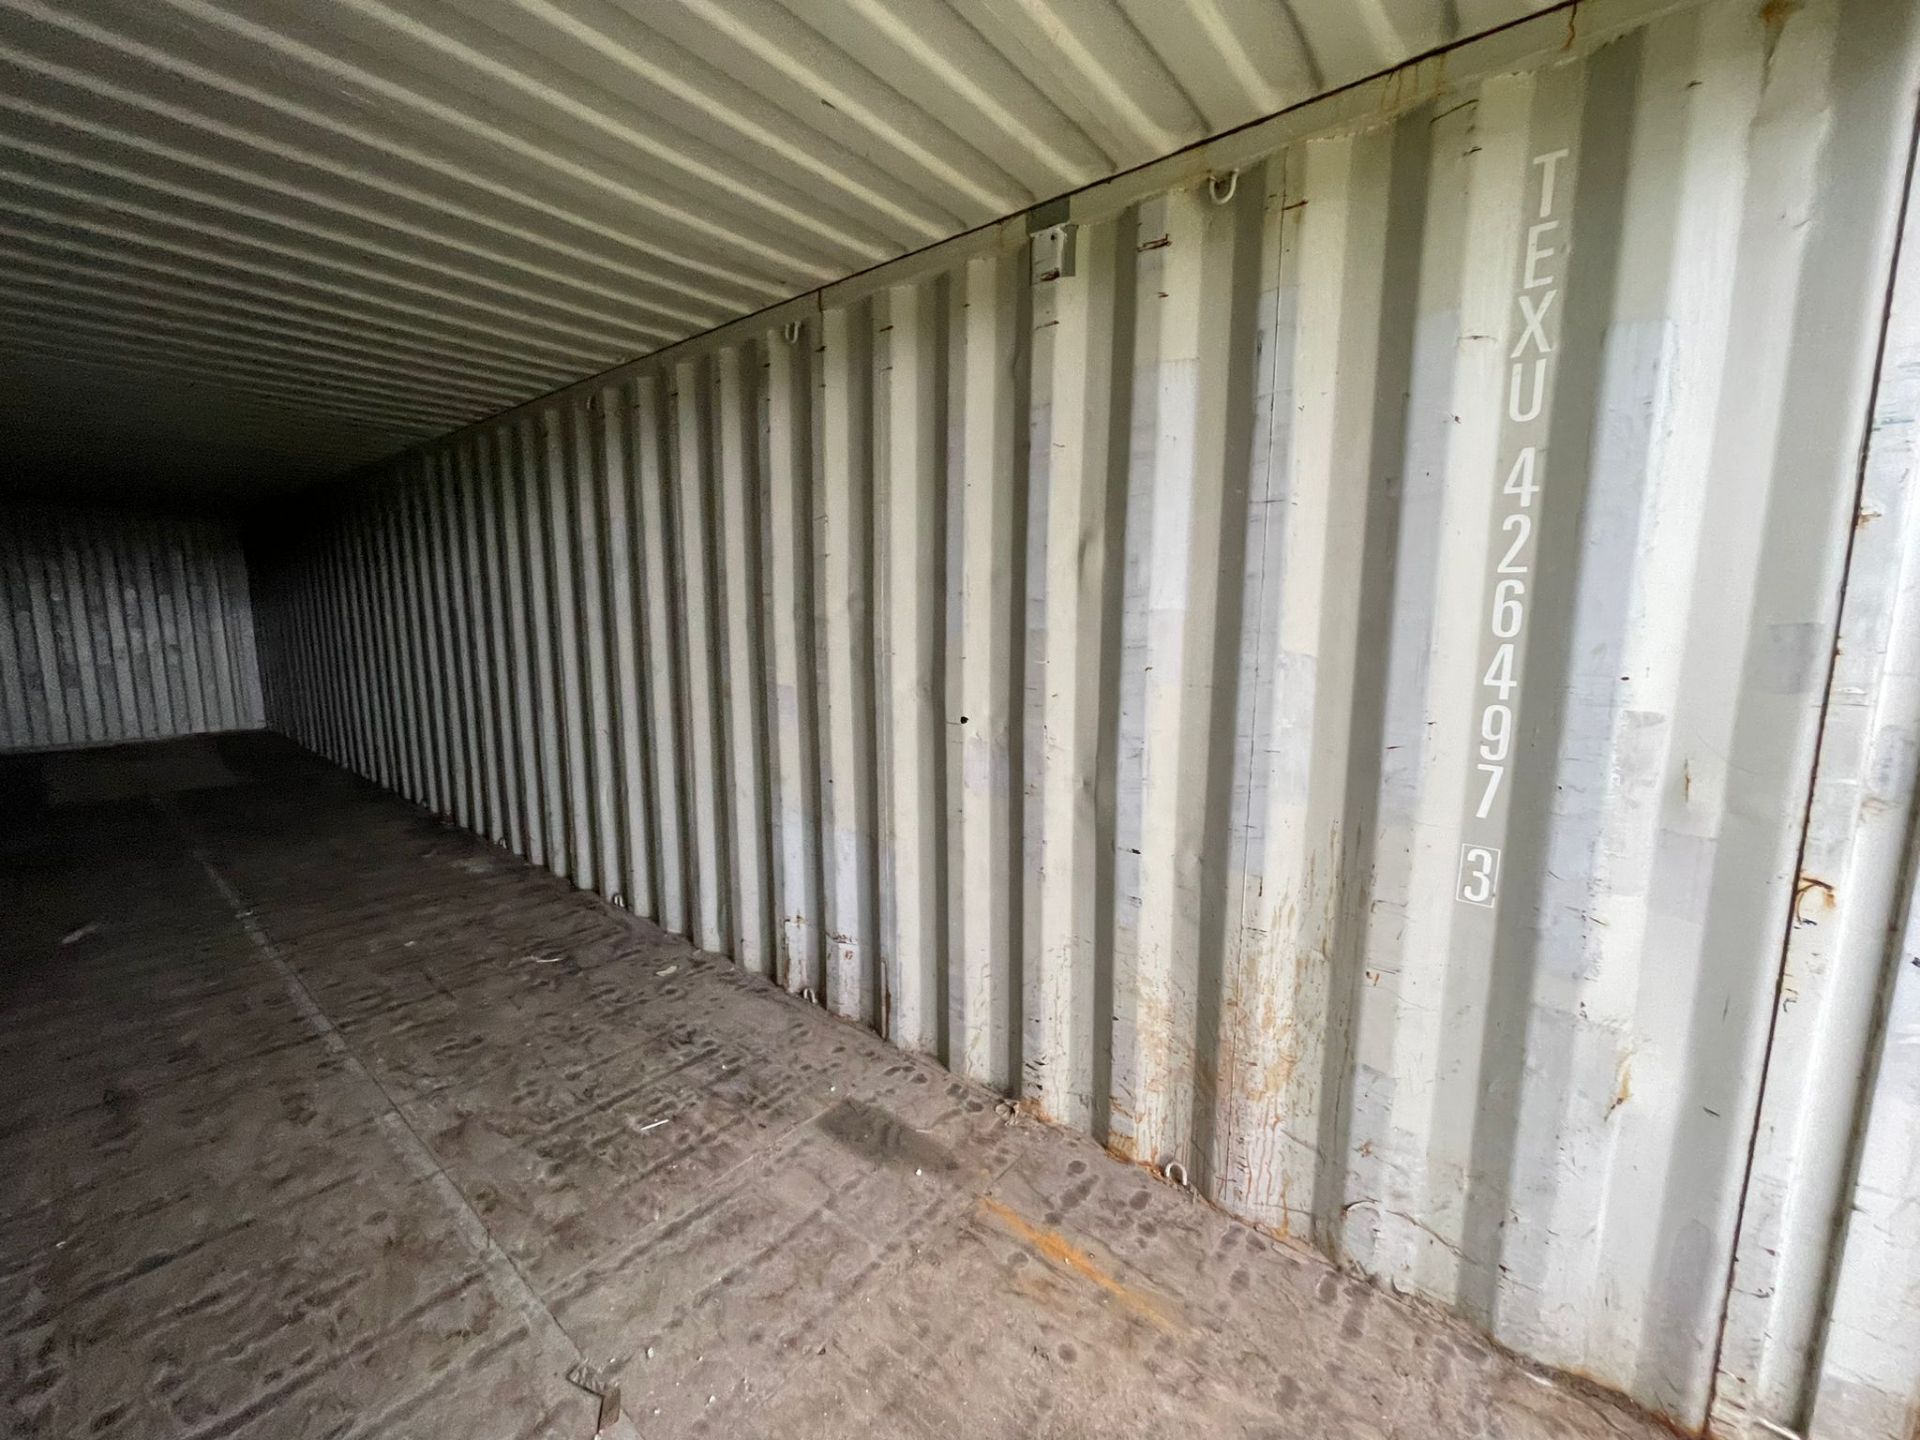 Shipping Container - ref TEXU4264973 - NO RESERVE (40’ GP - Standard) - Image 2 of 4